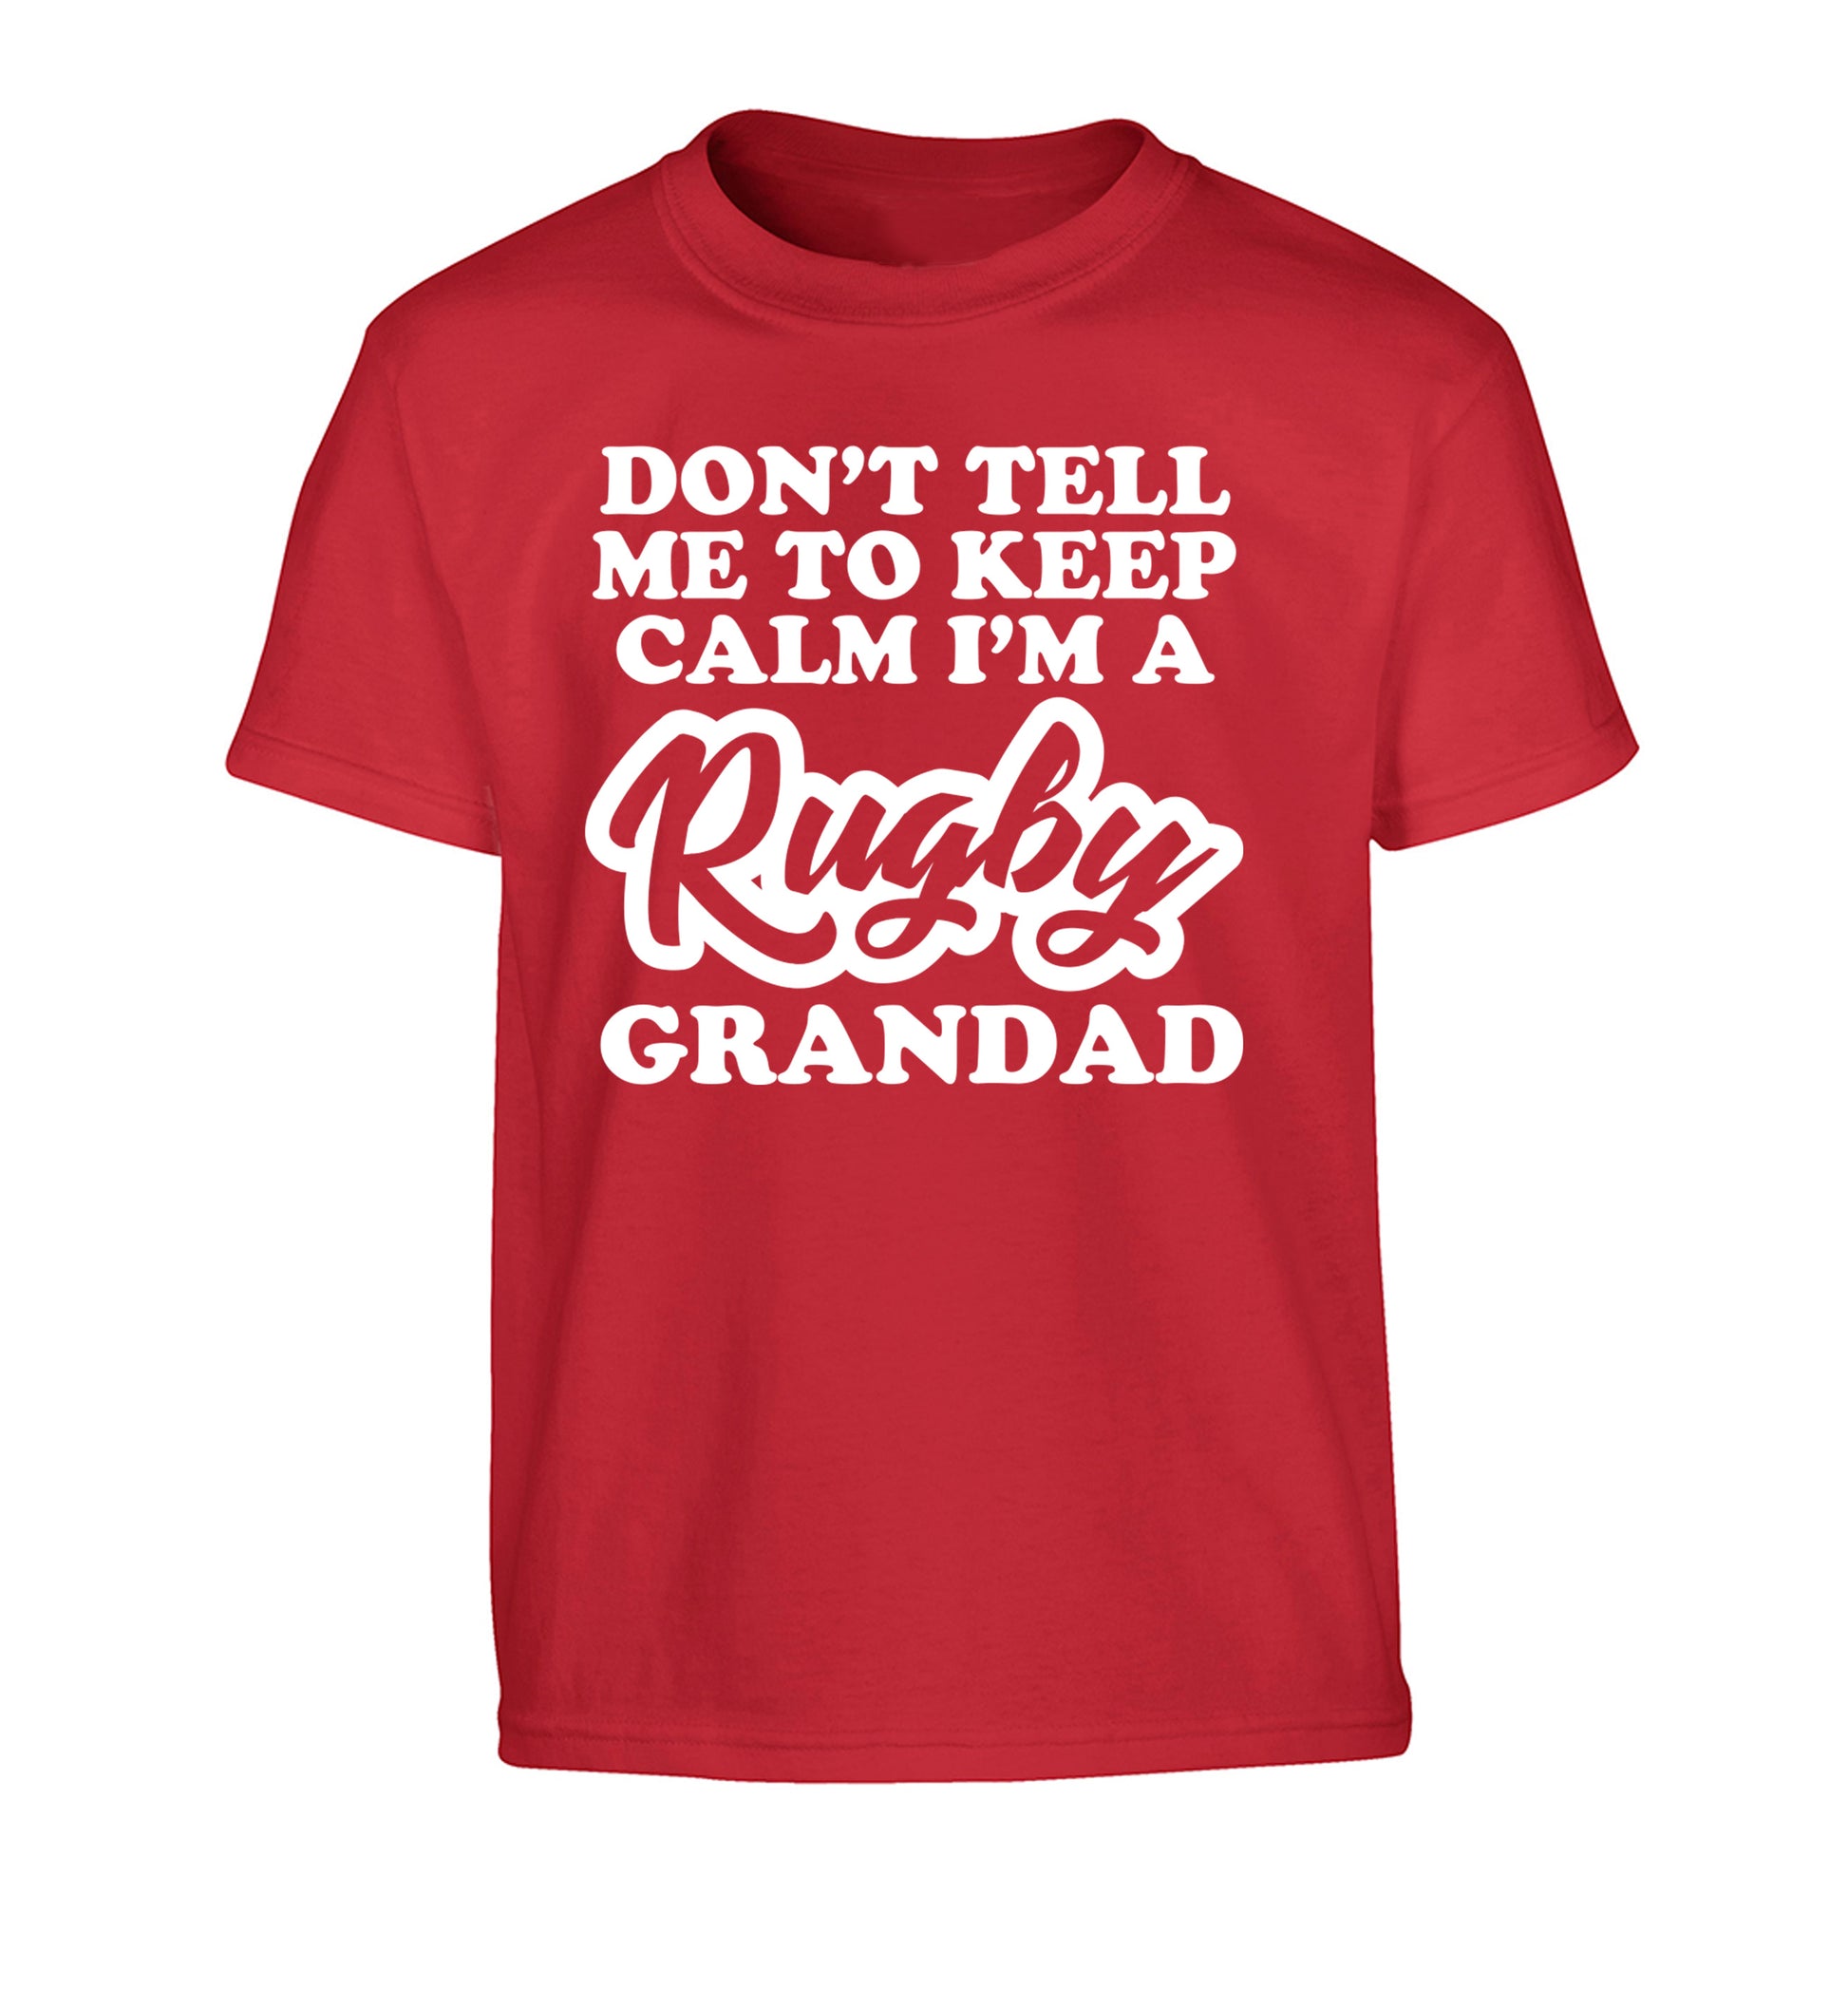 Don't tell me to keep calm I'm a rugby dad Children's red Tshirt 12-13 Years